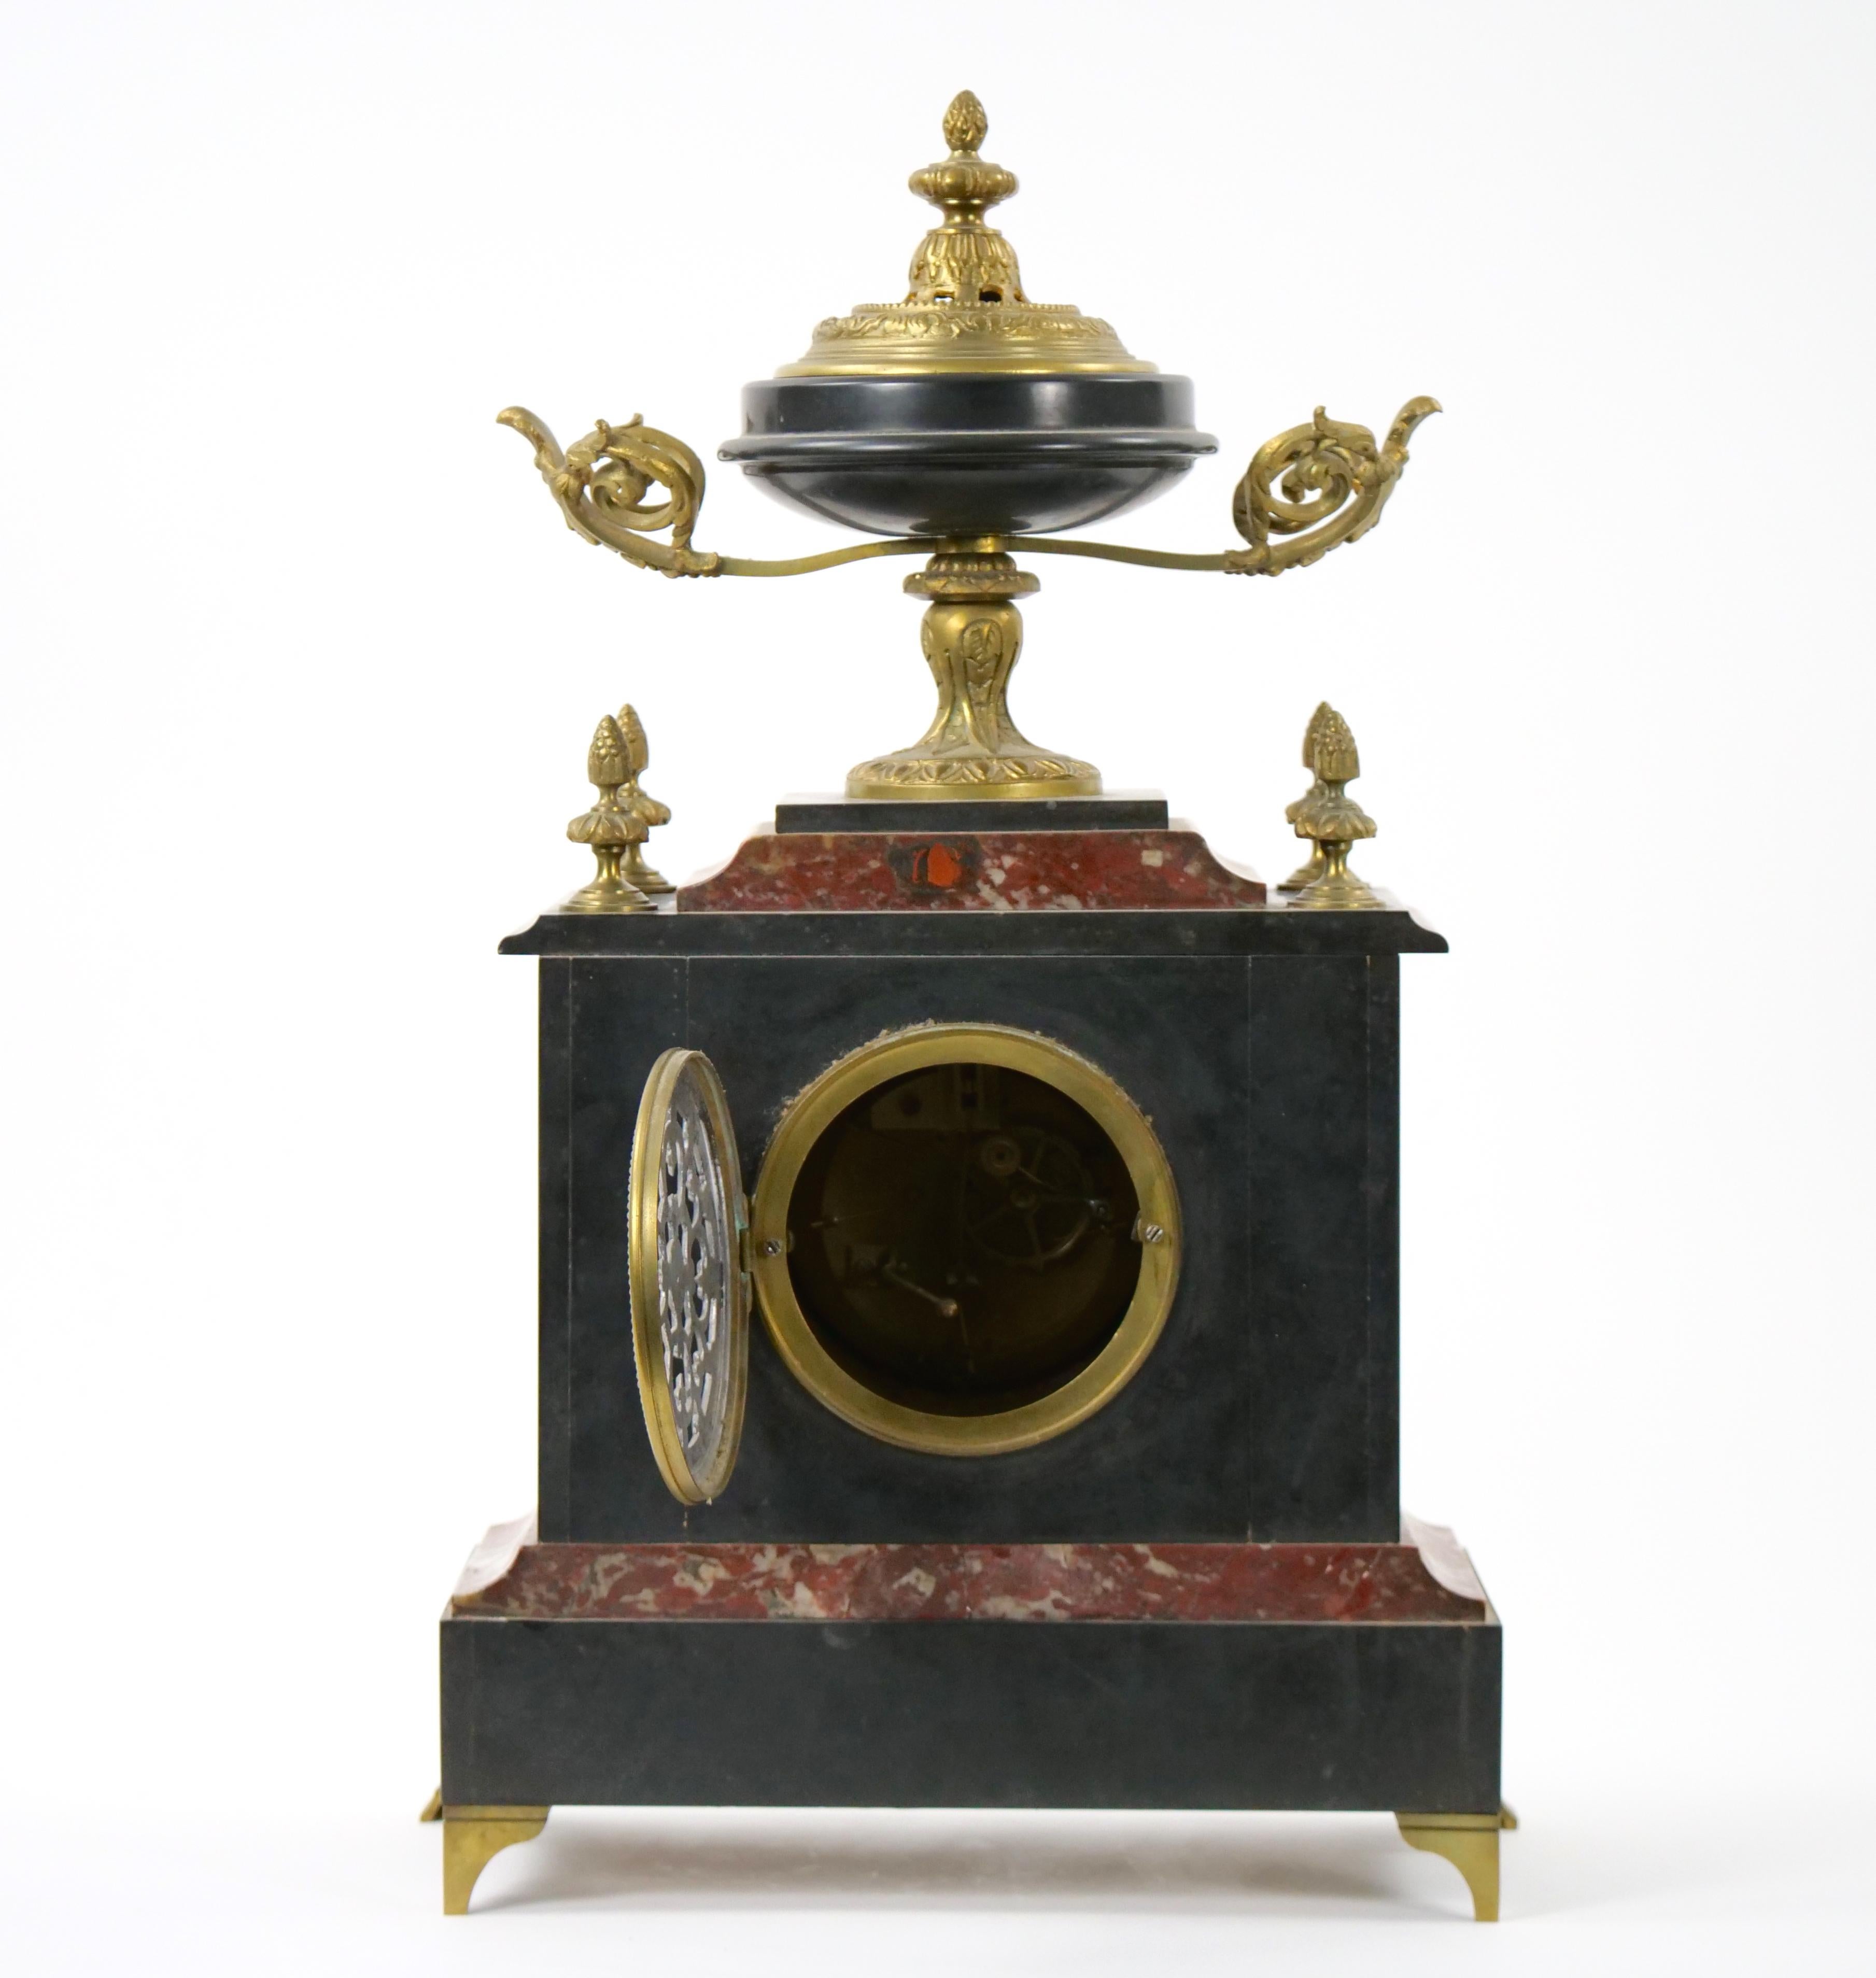 19th Century French Gilt Bronze-Mounted Slate & Rouge Marble Mantel Clock For Sale 11